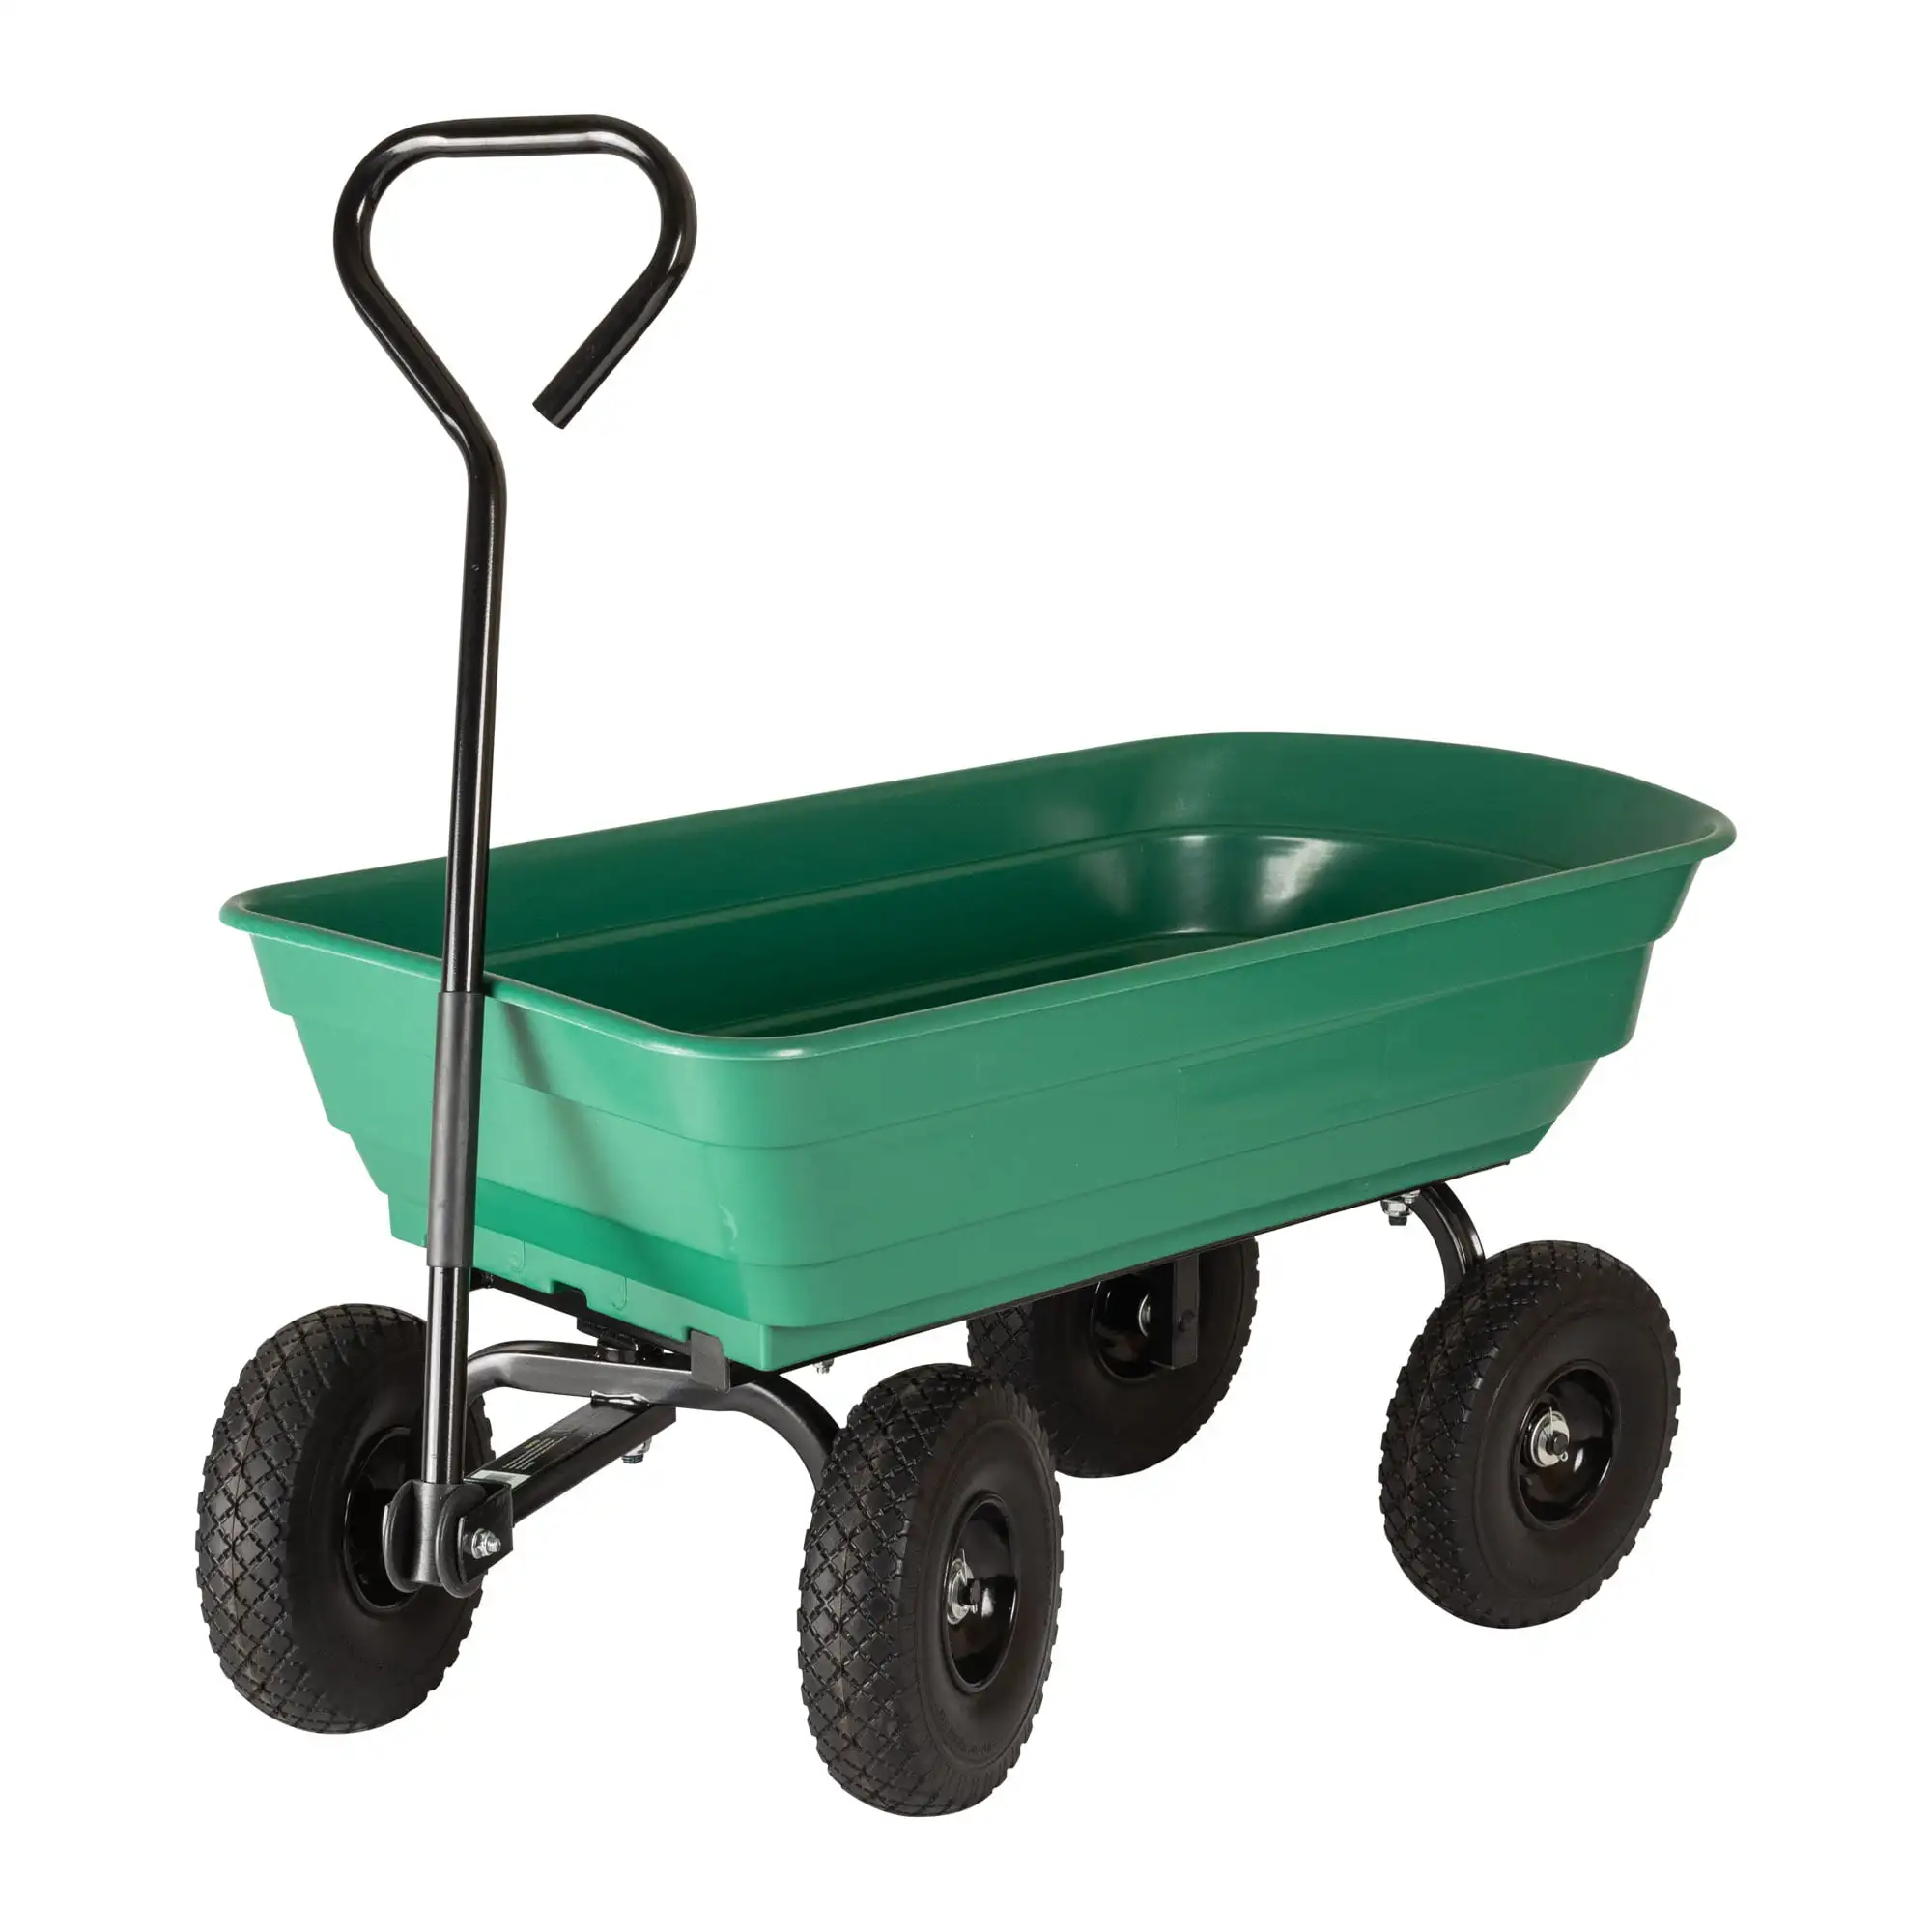 4 Cubic Foot Green Poly Tray Garden Wagon with Flat Free Tires